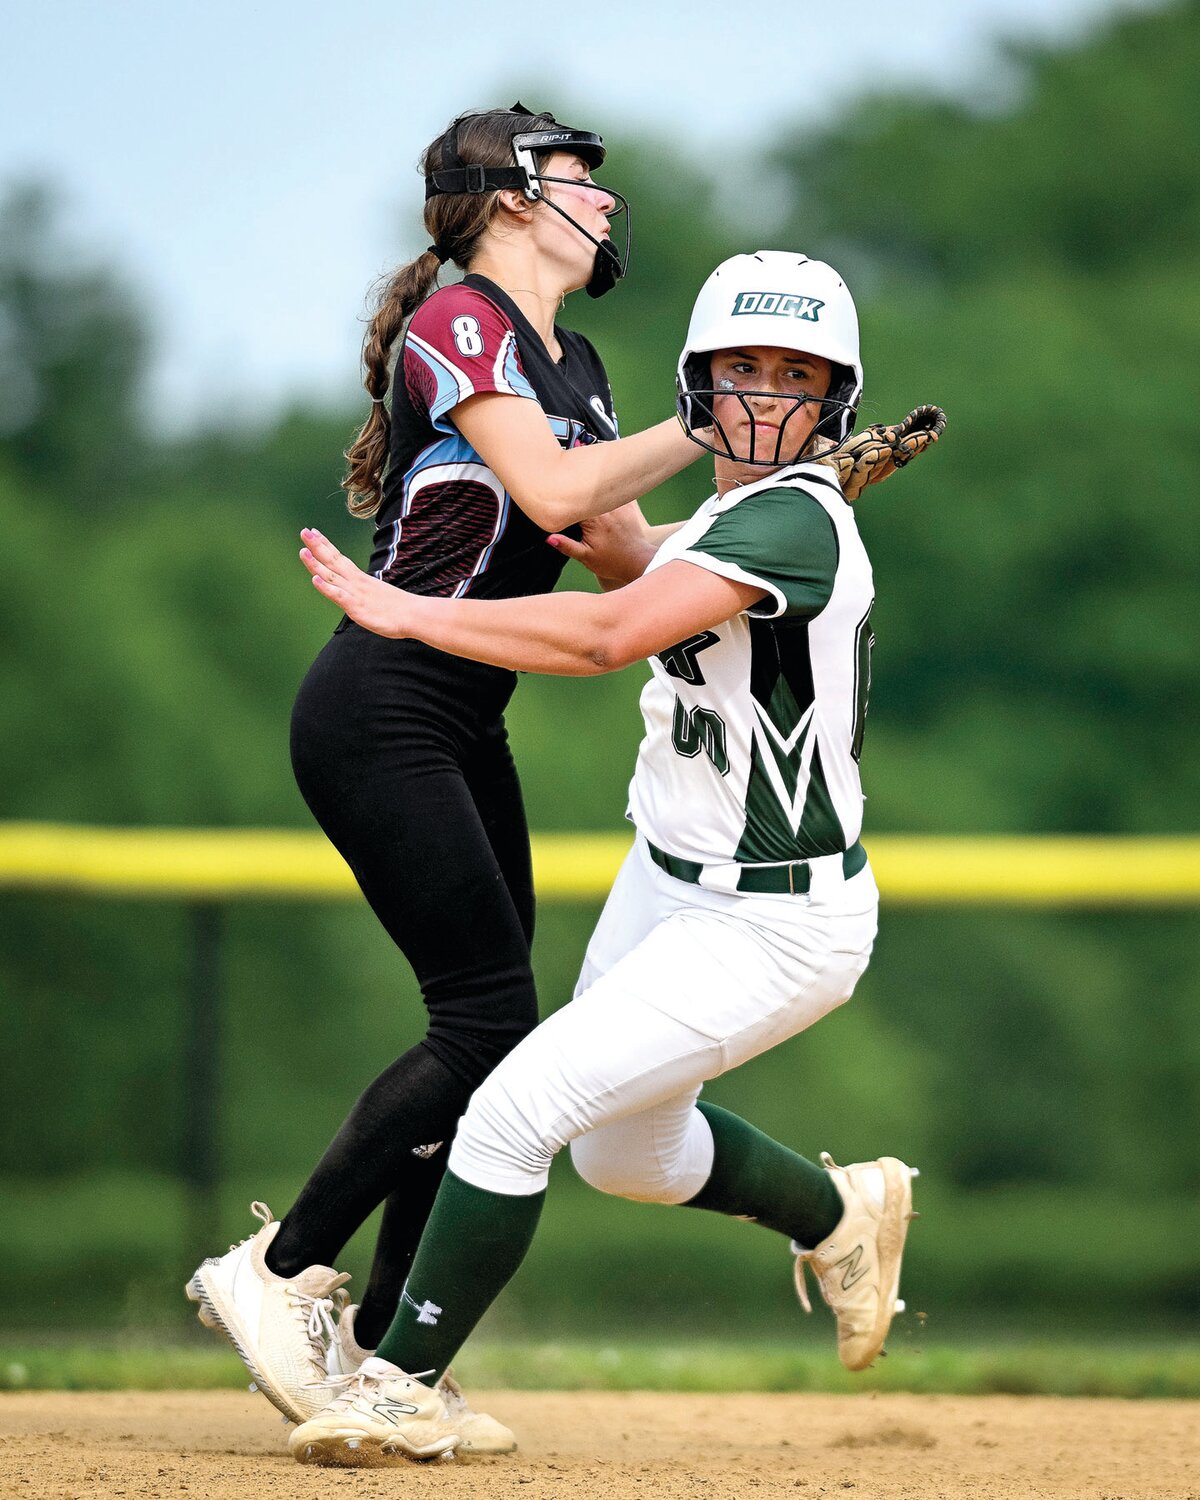 Dock’s Addison Landis and Faith Christian’s Cheyenne Greene collide while Landis rounds second base during the bottom of the third inning.